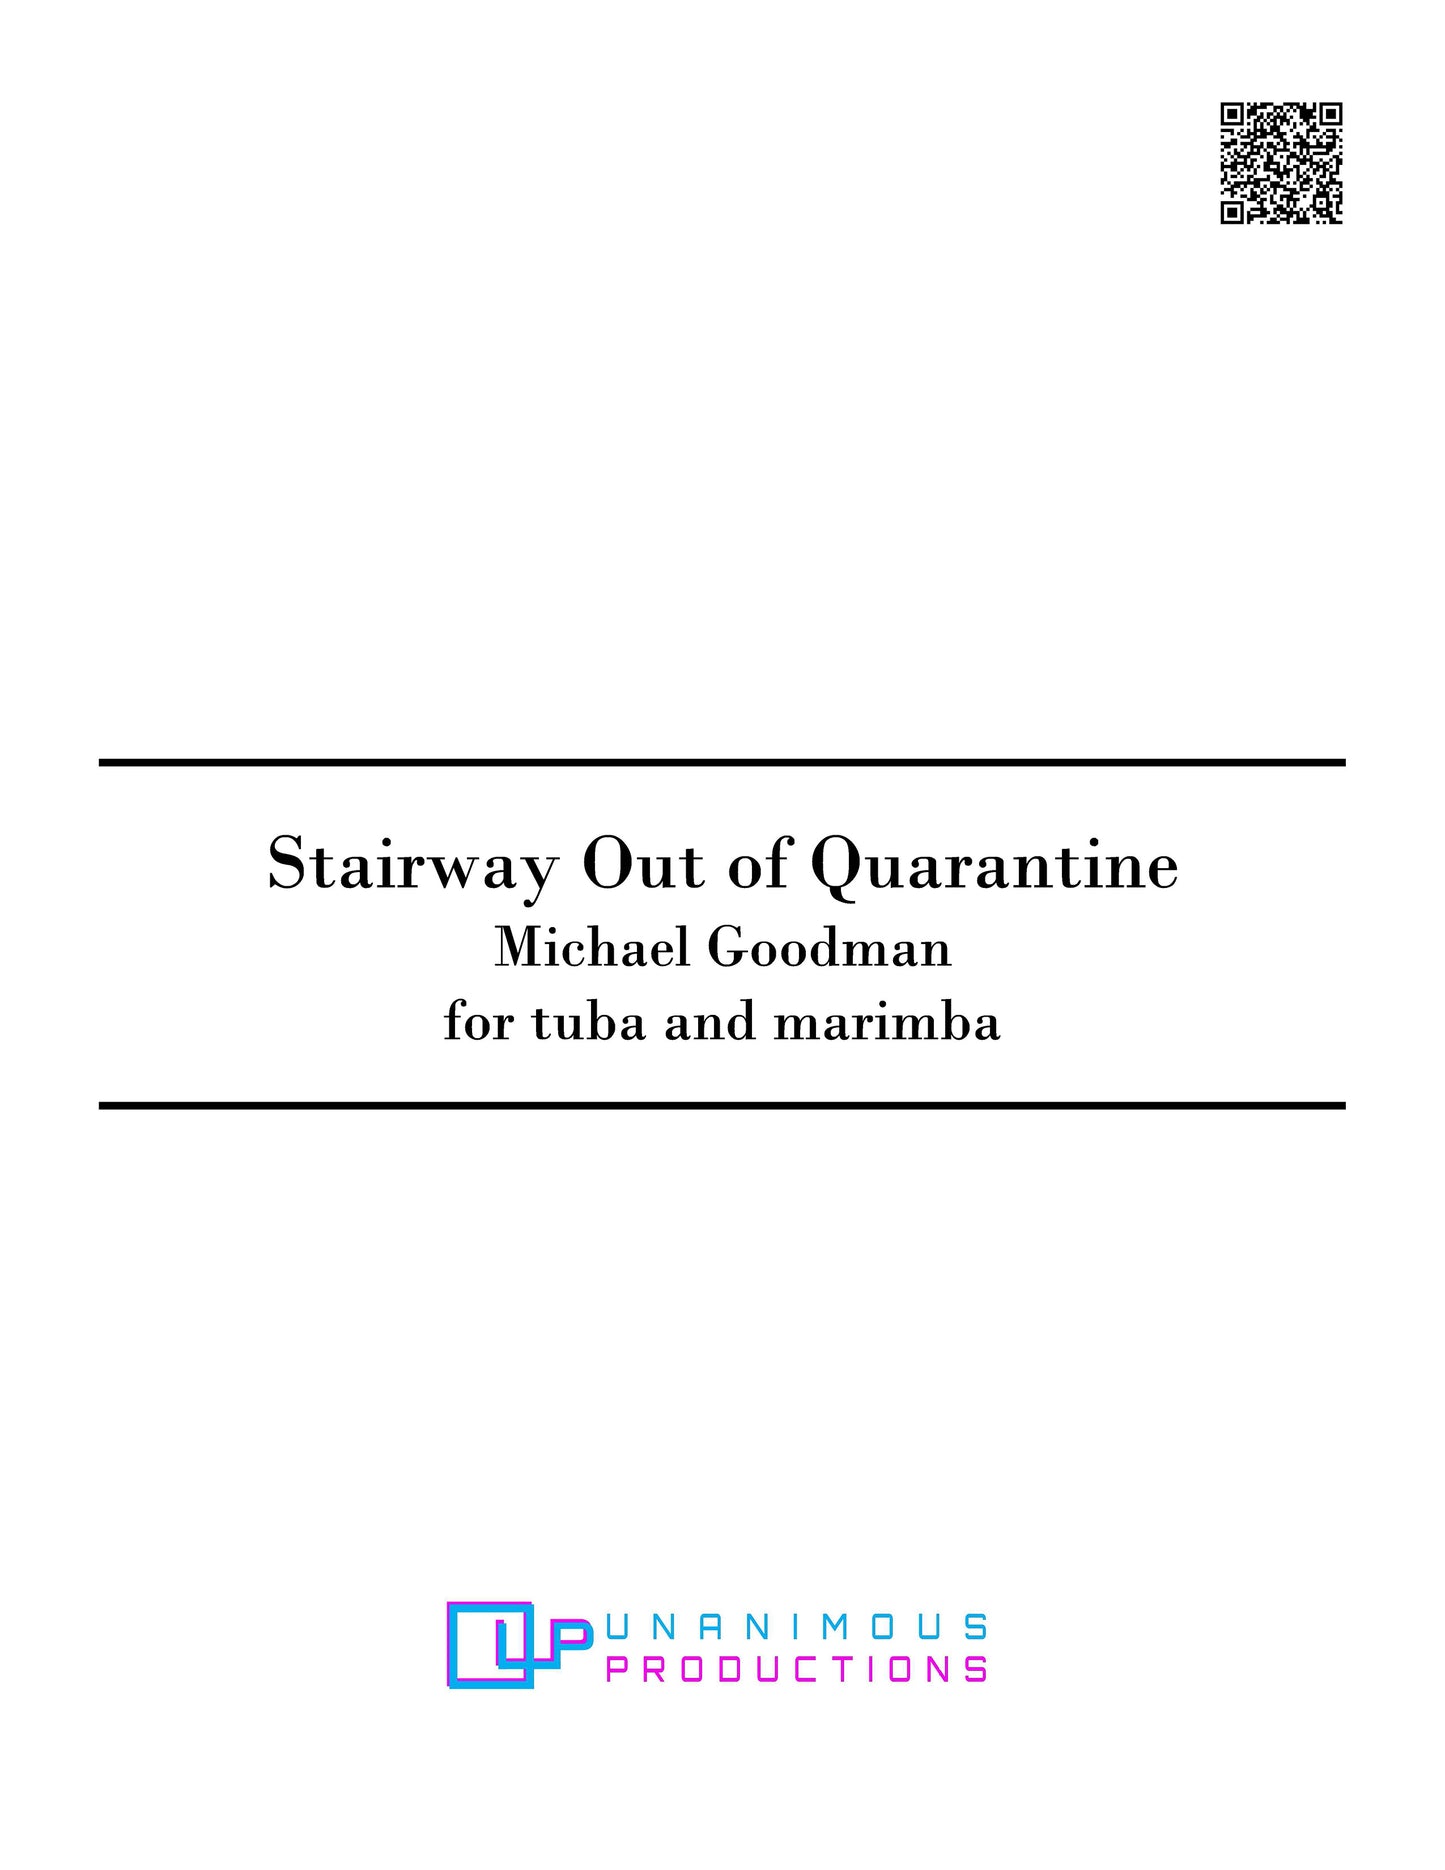 Goodman, Michael - Stairway Out of Quarantine - DOWNLOAD